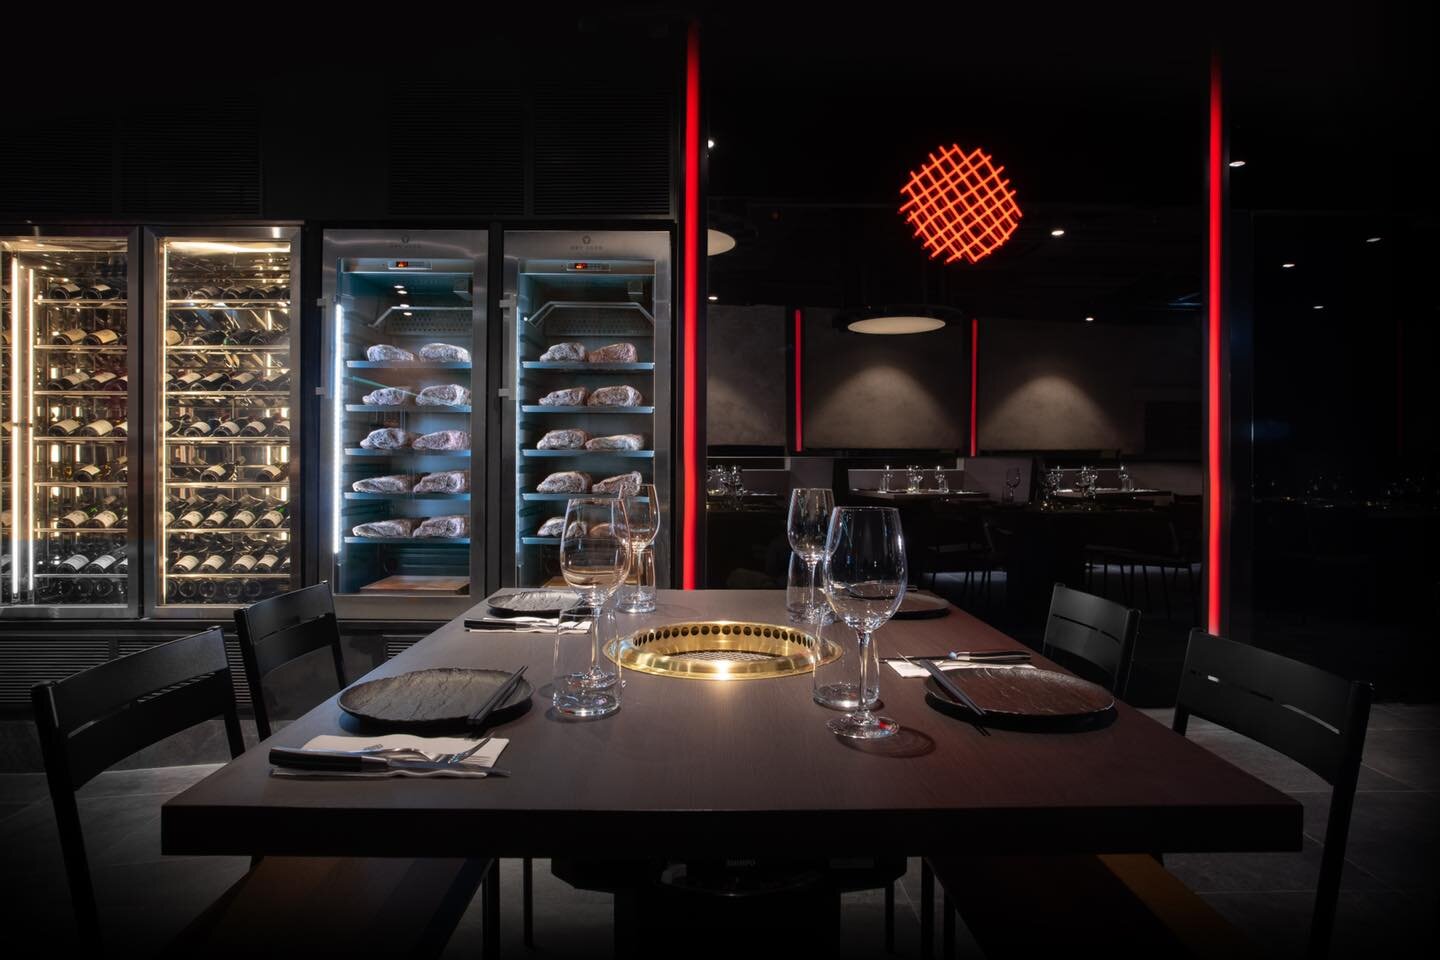 WE ARE OPENED! 

JJJ started with a mission to provide our guests with a splendid steakhouse dinning experience through our inhouse-selected beef and quality service level. We feature a menu presenting our philosophy to offer the world finest beef, c